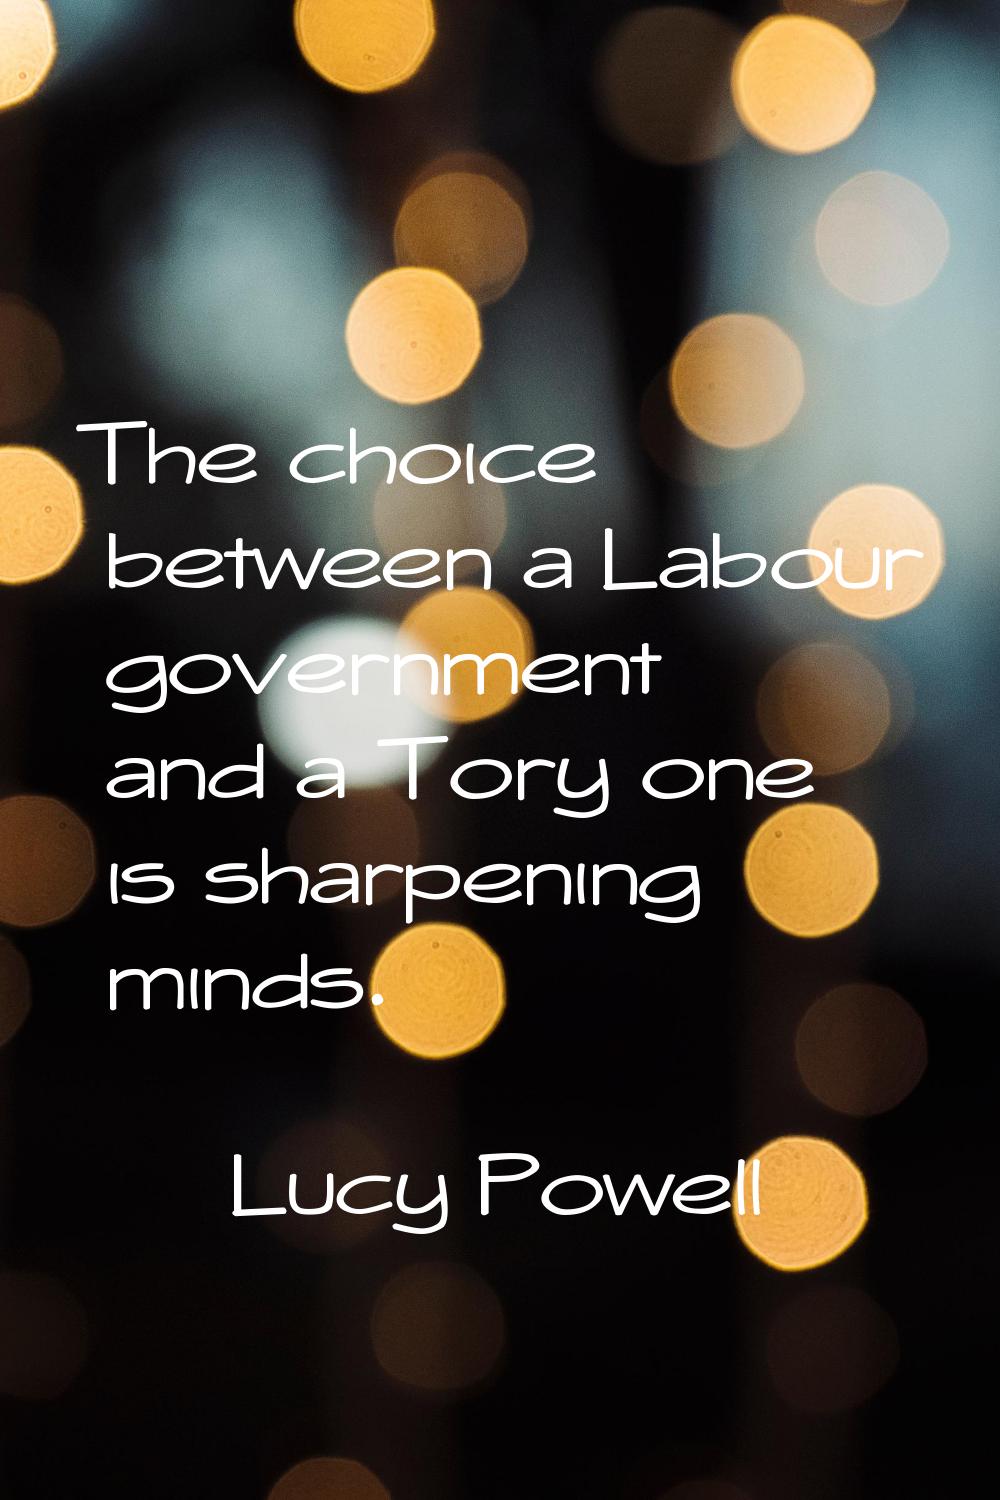 The choice between a Labour government and a Tory one is sharpening minds.